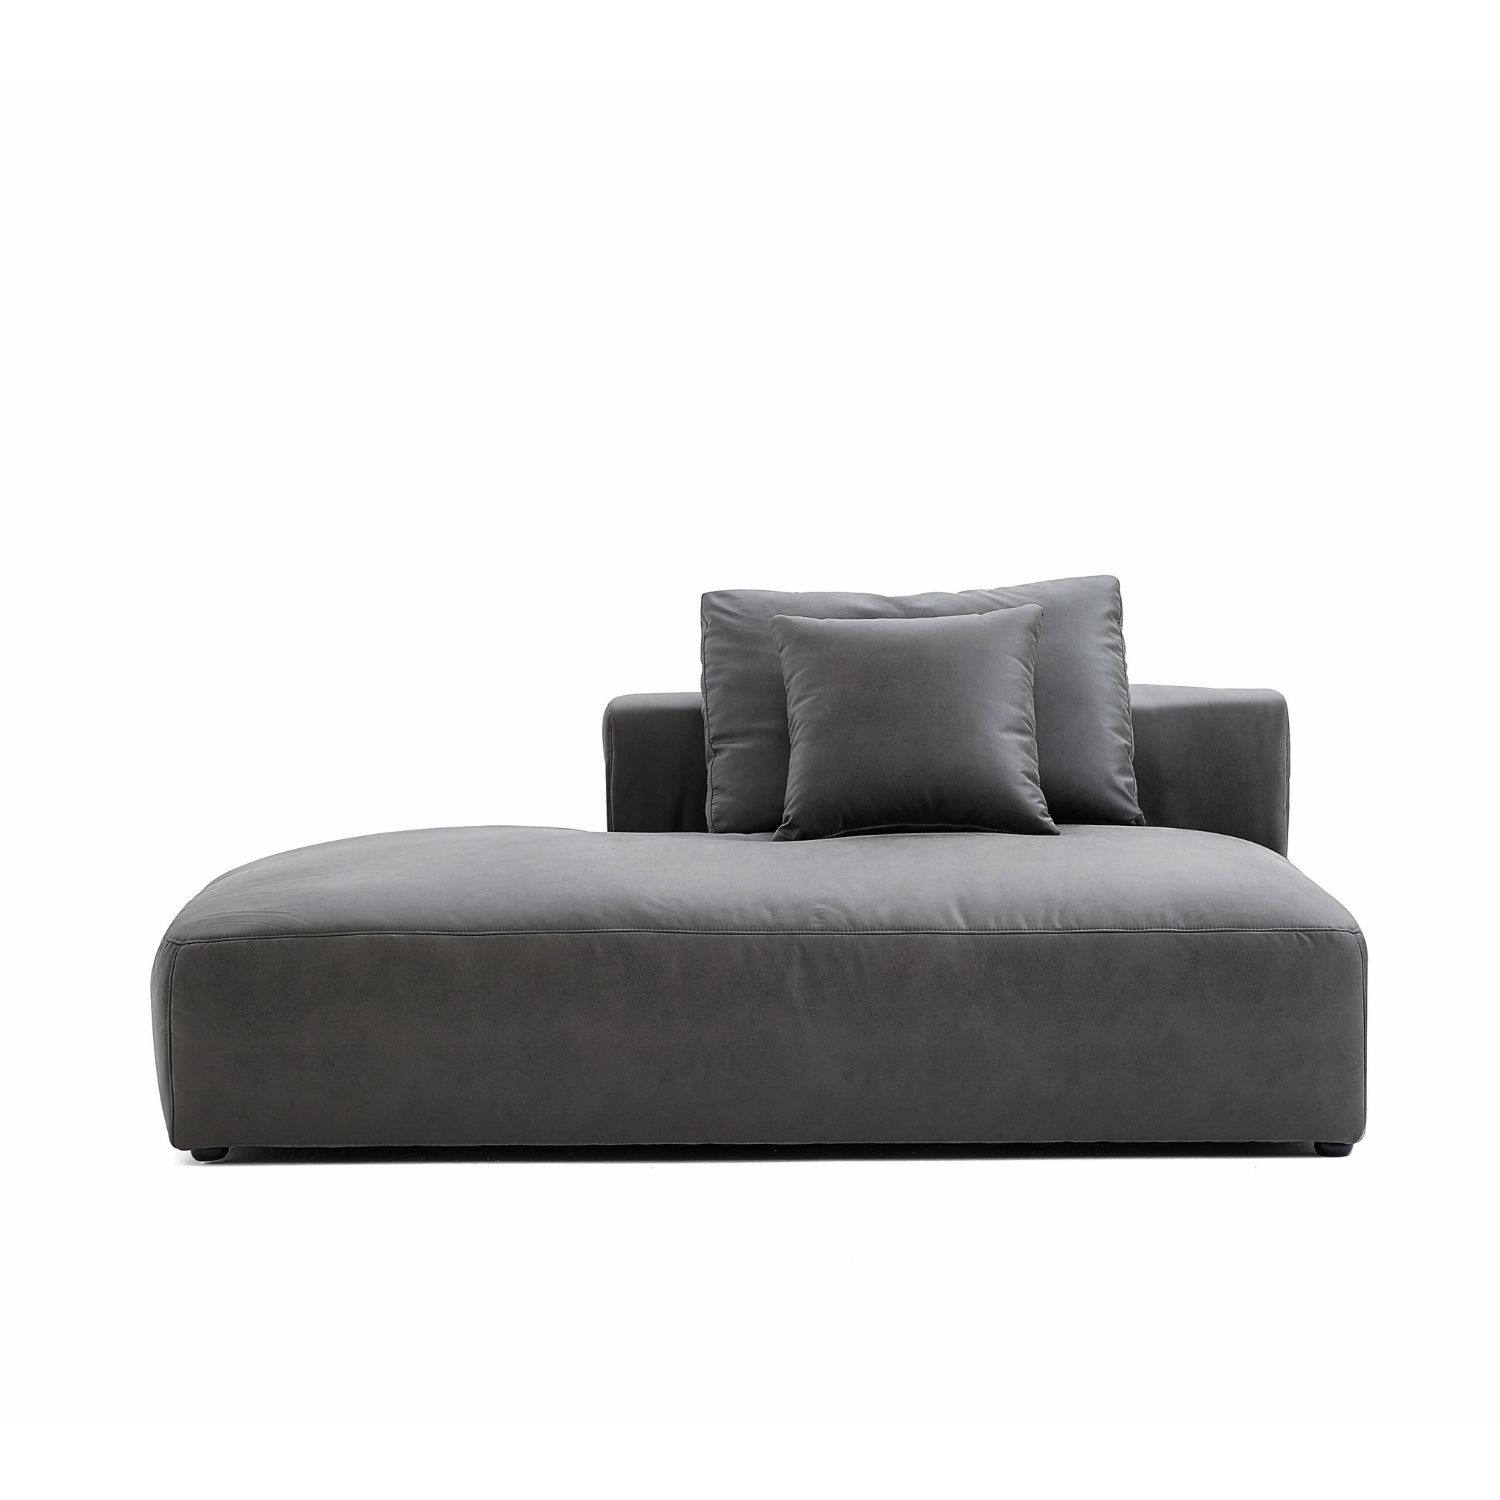 The 5th Side Lounge Sofa Foundry Dark Grey Facing Right 71 Inch